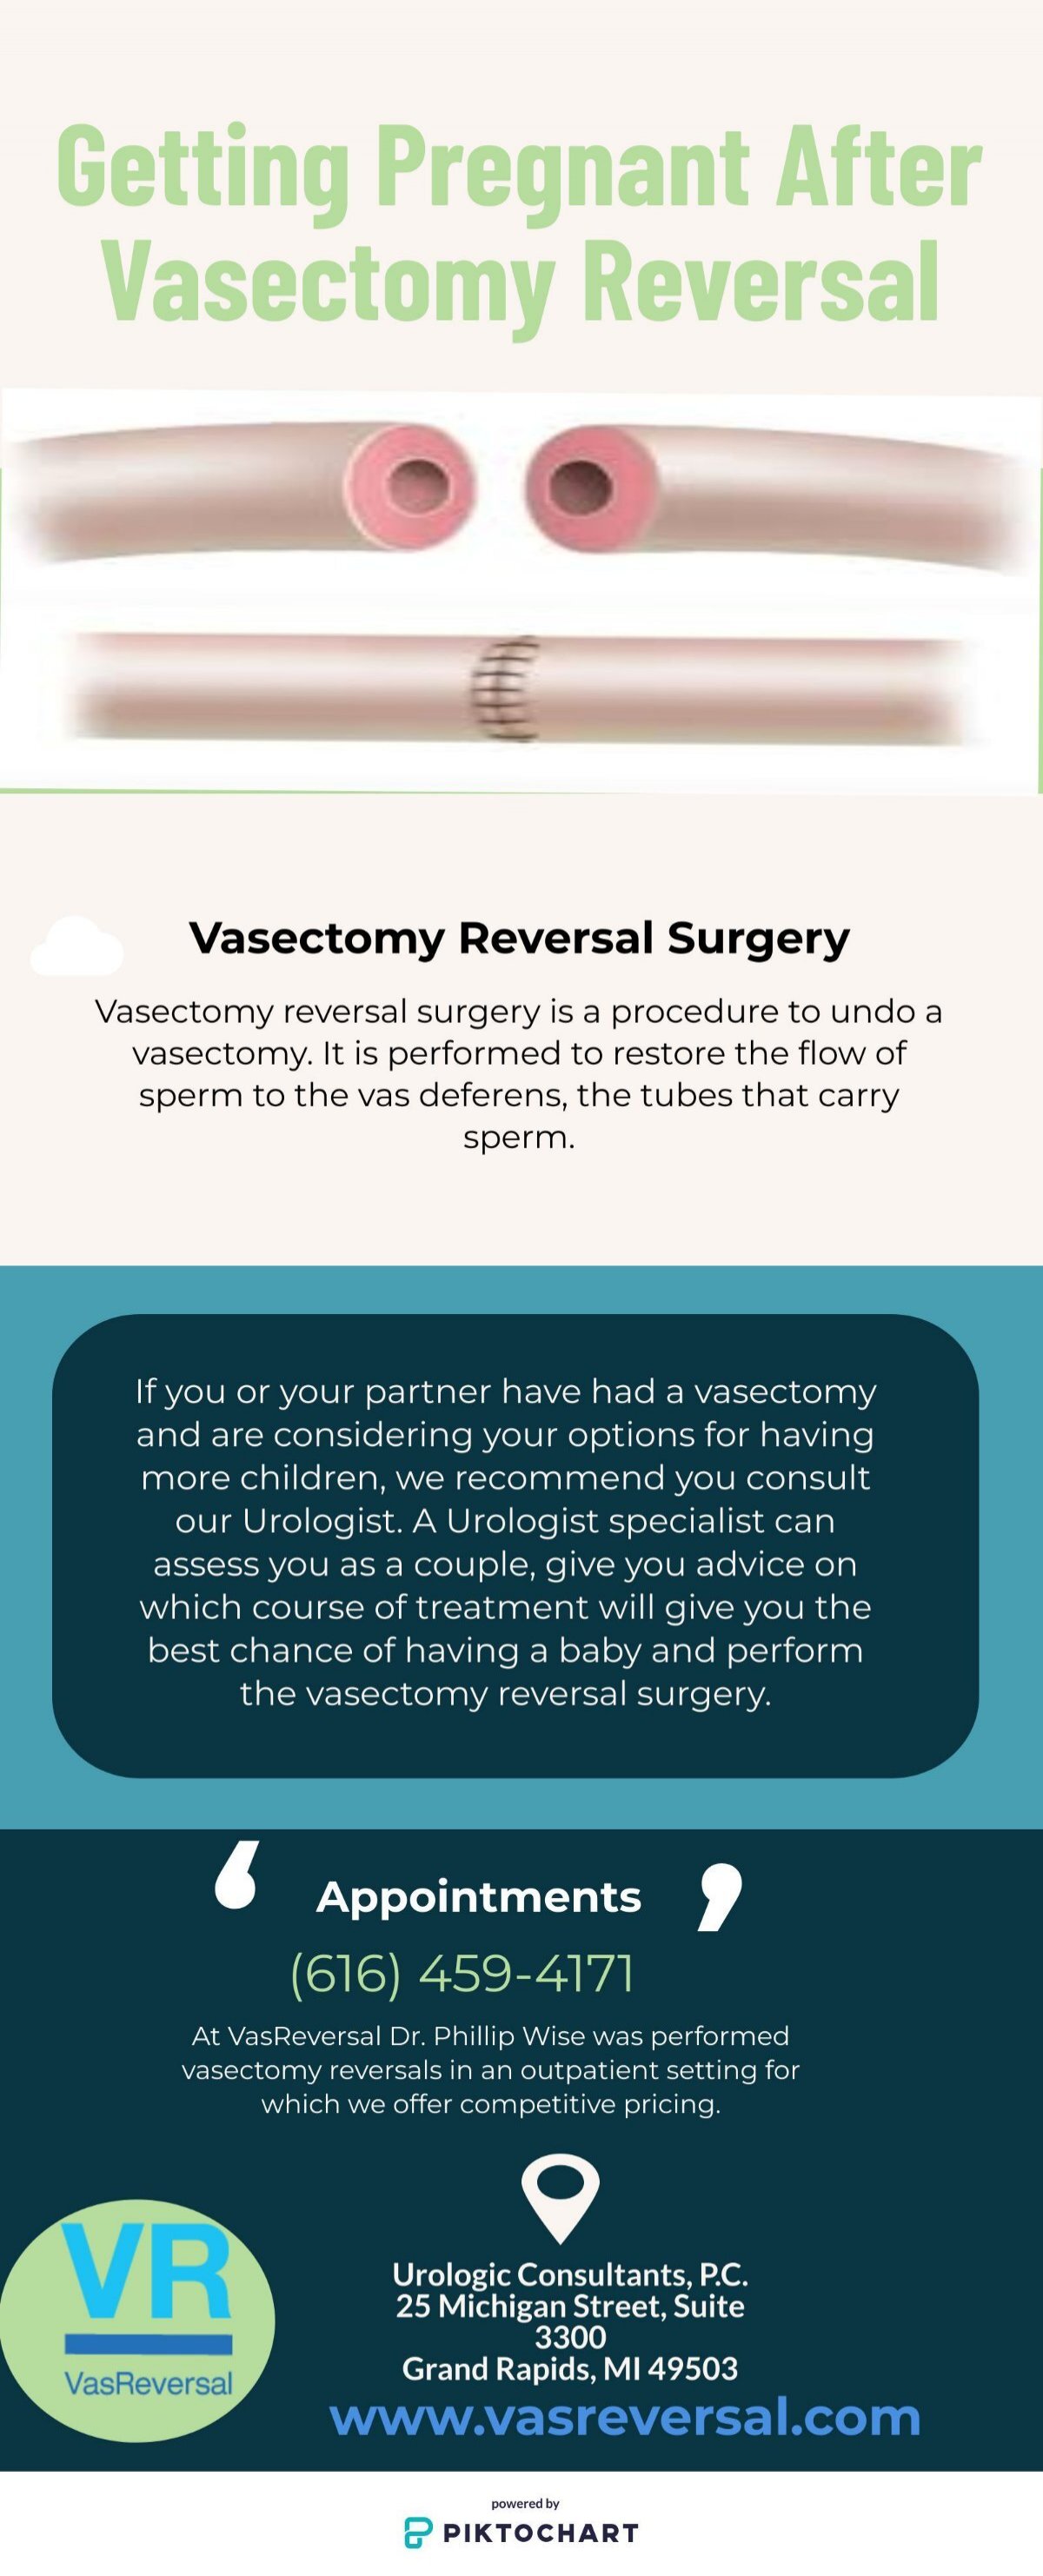 Getting Pregnant After Vasectomy Reversal 